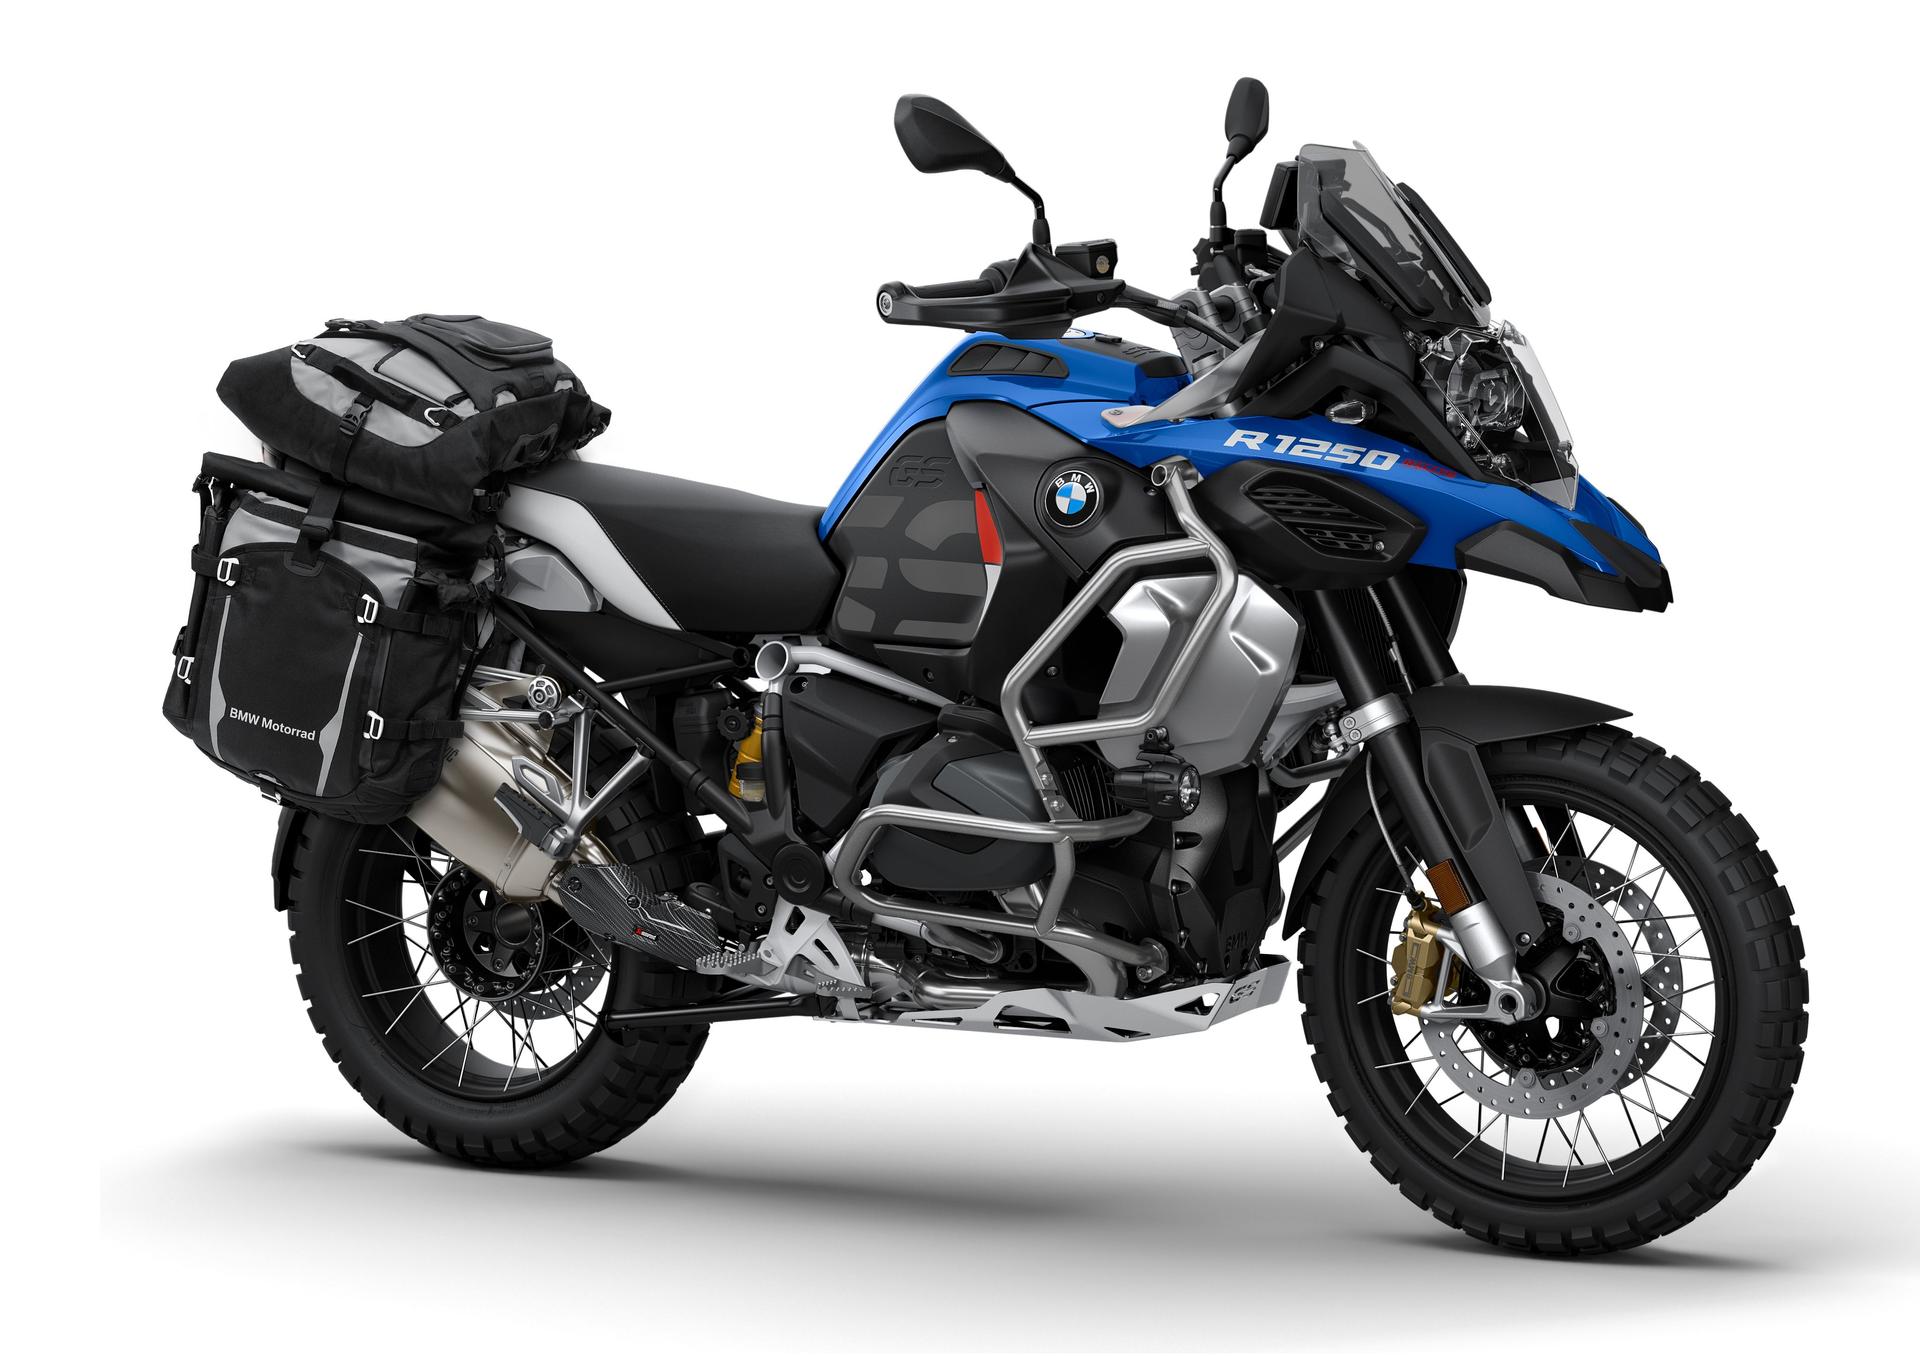 BMW Motorrad issued a recall for few models of the R 1250 GS and the R1250 GS Adventure in Europe over a potential leak in the fuel line of the motorcycles due to a faulty pressure sensor